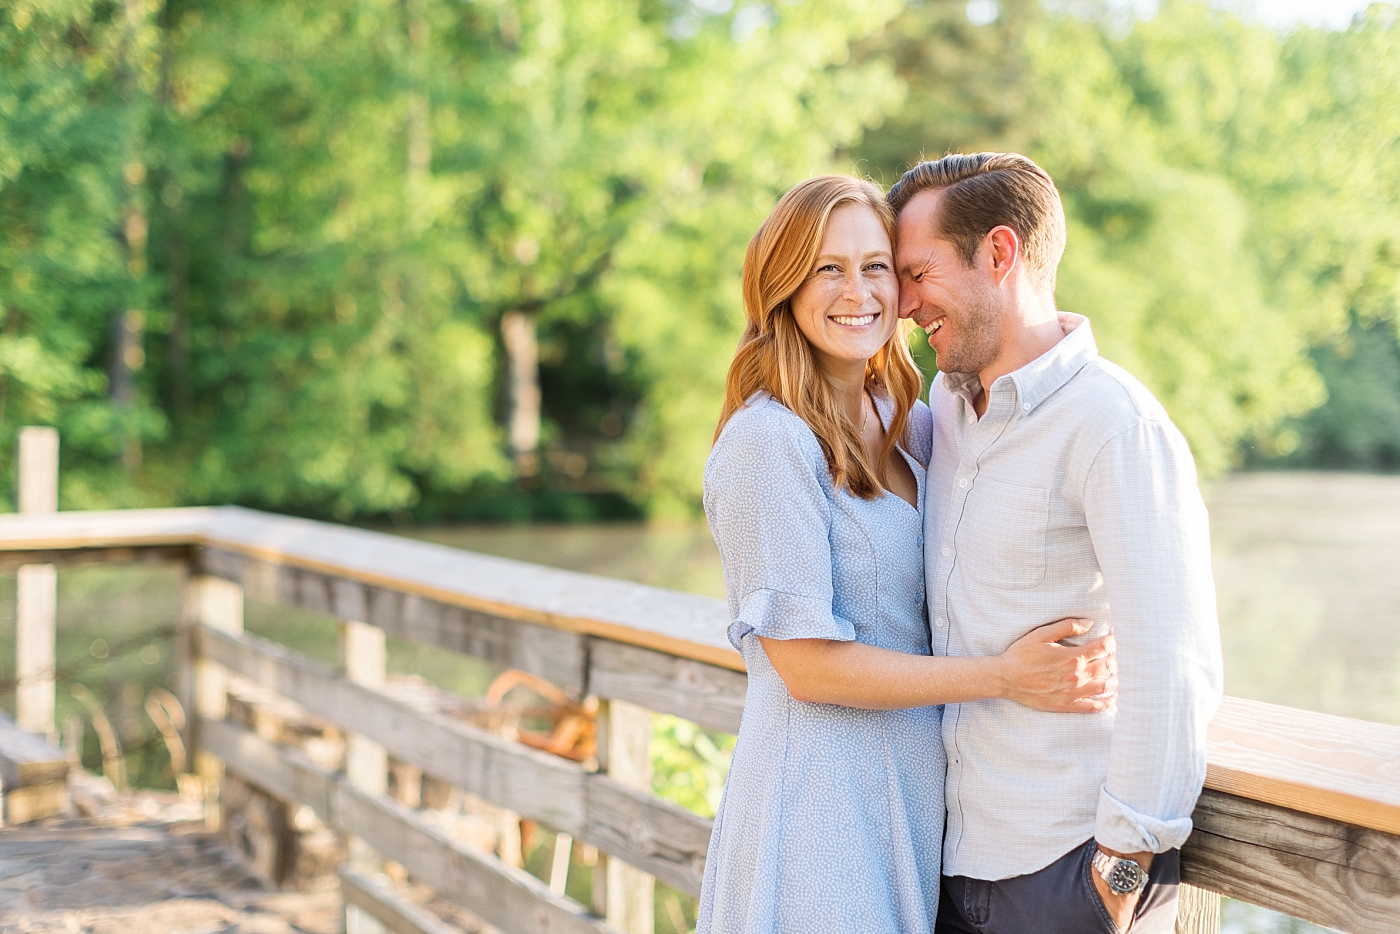 Engagement Photos at Yates Mill Park in Raleigh | Engagement Photographer | Sarah Hinckley Photography